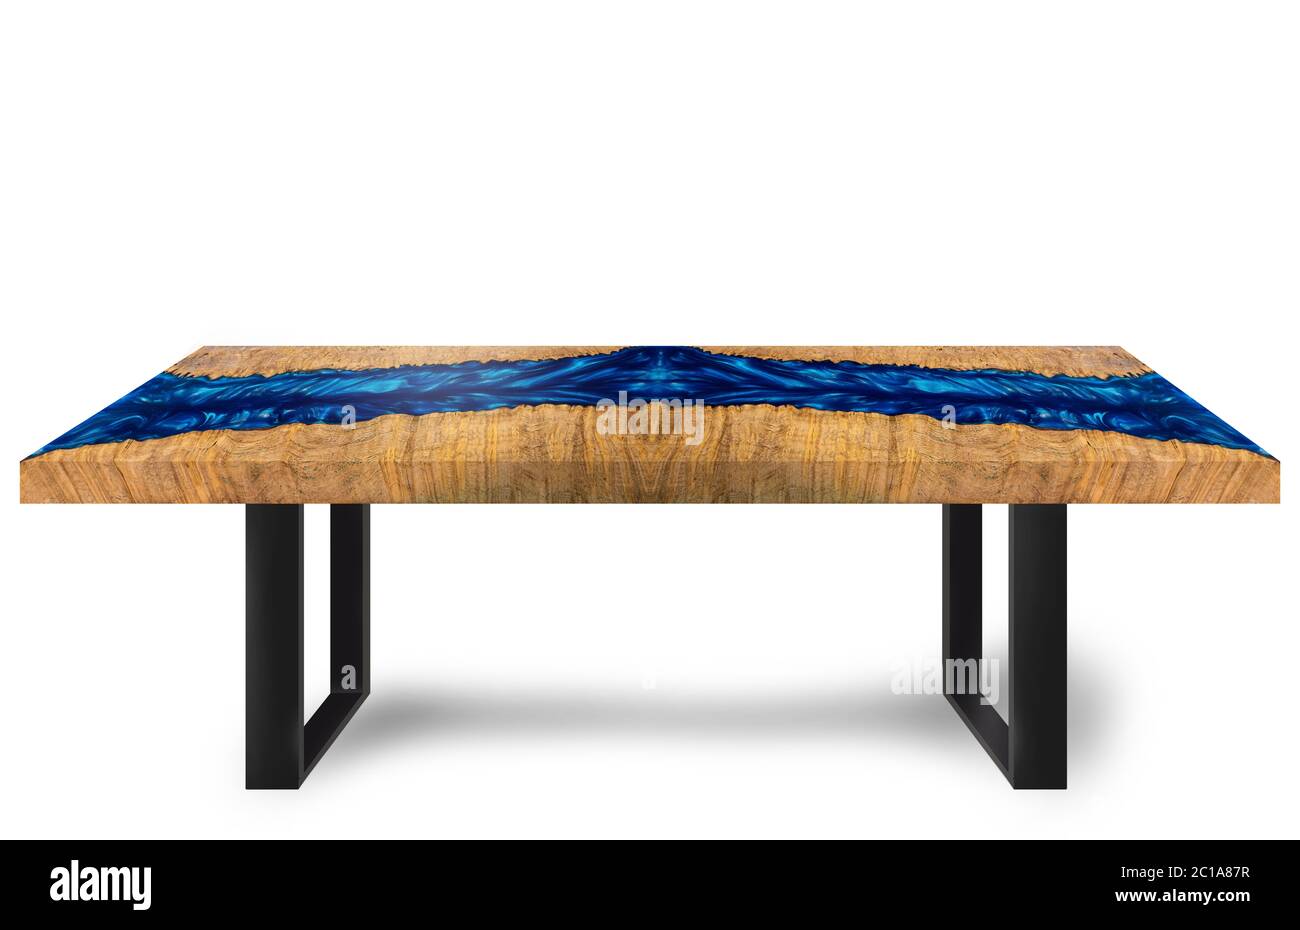 Table modern style made of casting epoxy blue resin maple burl wood  legs made of steel on floor white background Stock Photo